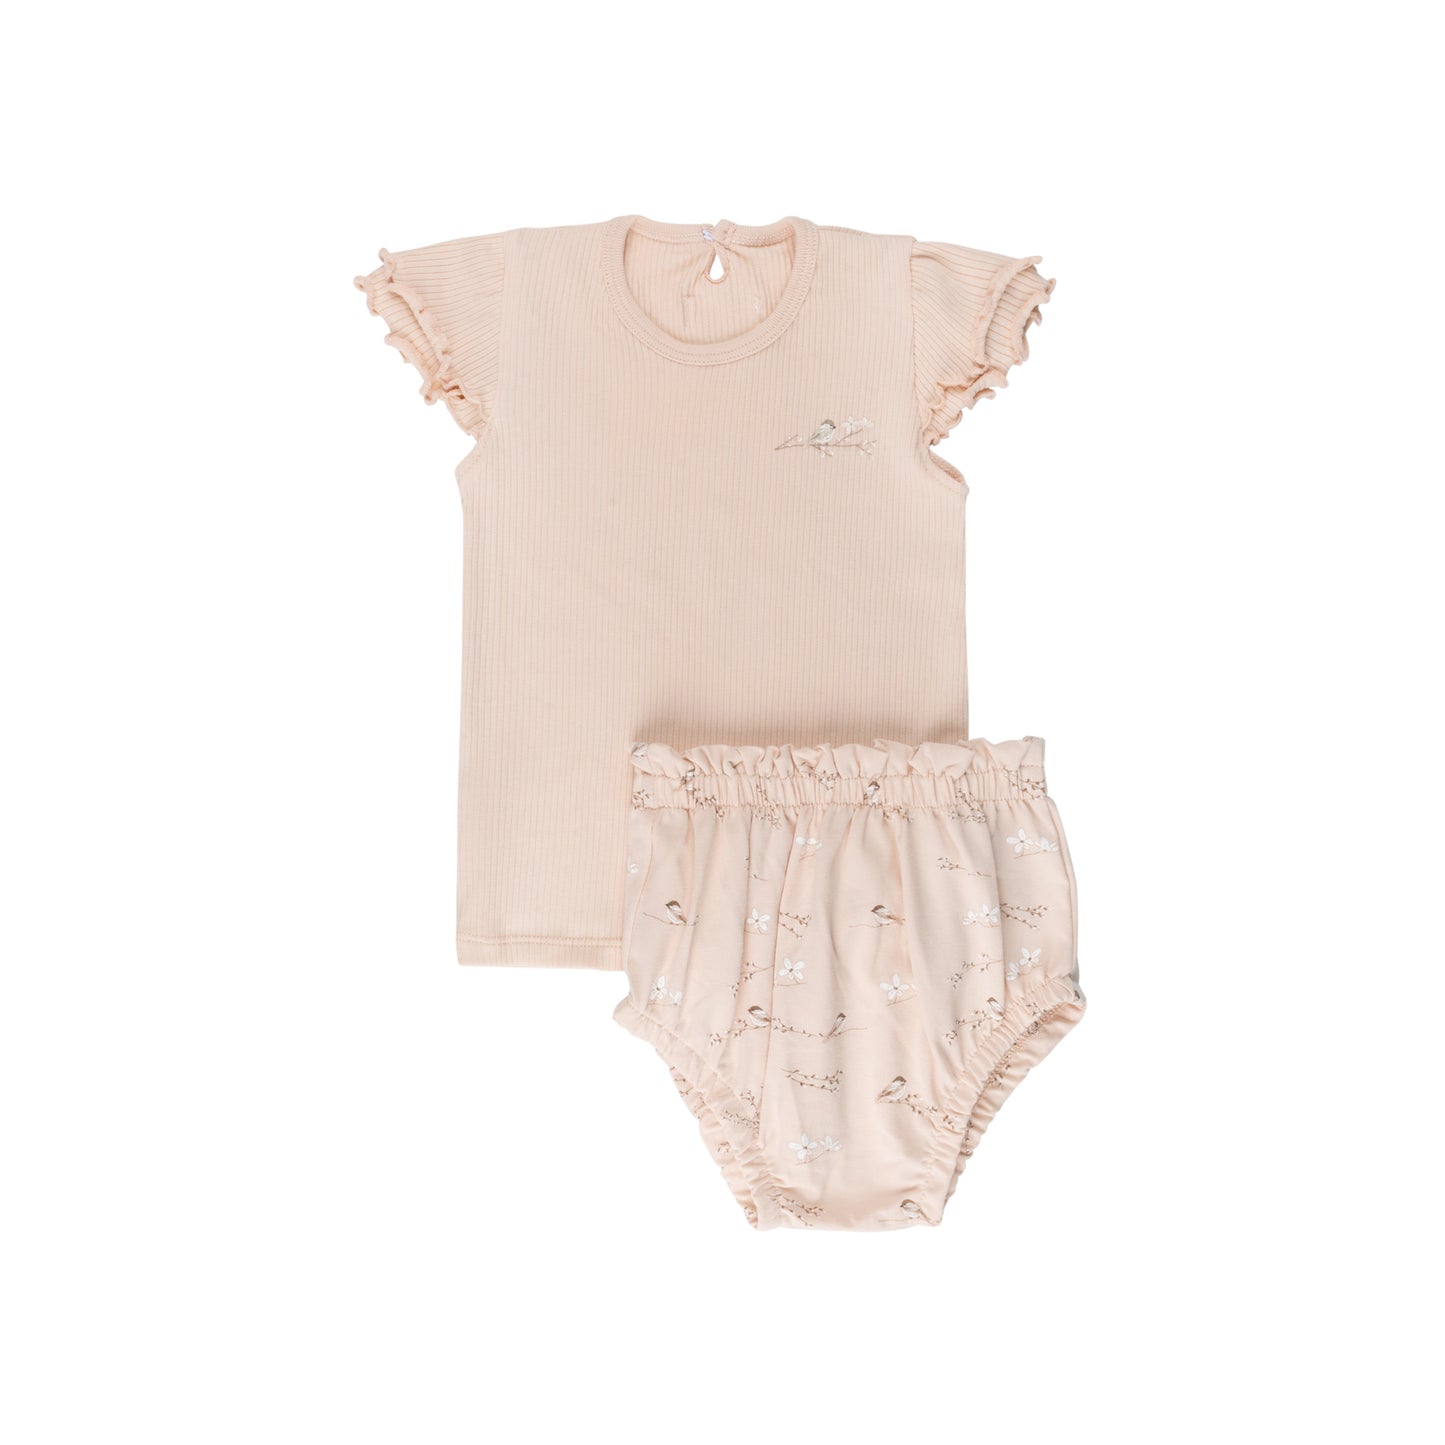 ELY'S & CO. BLUSH VINTAGE BIRDS TEE & BLOOMERS SET [FINAL SALE]